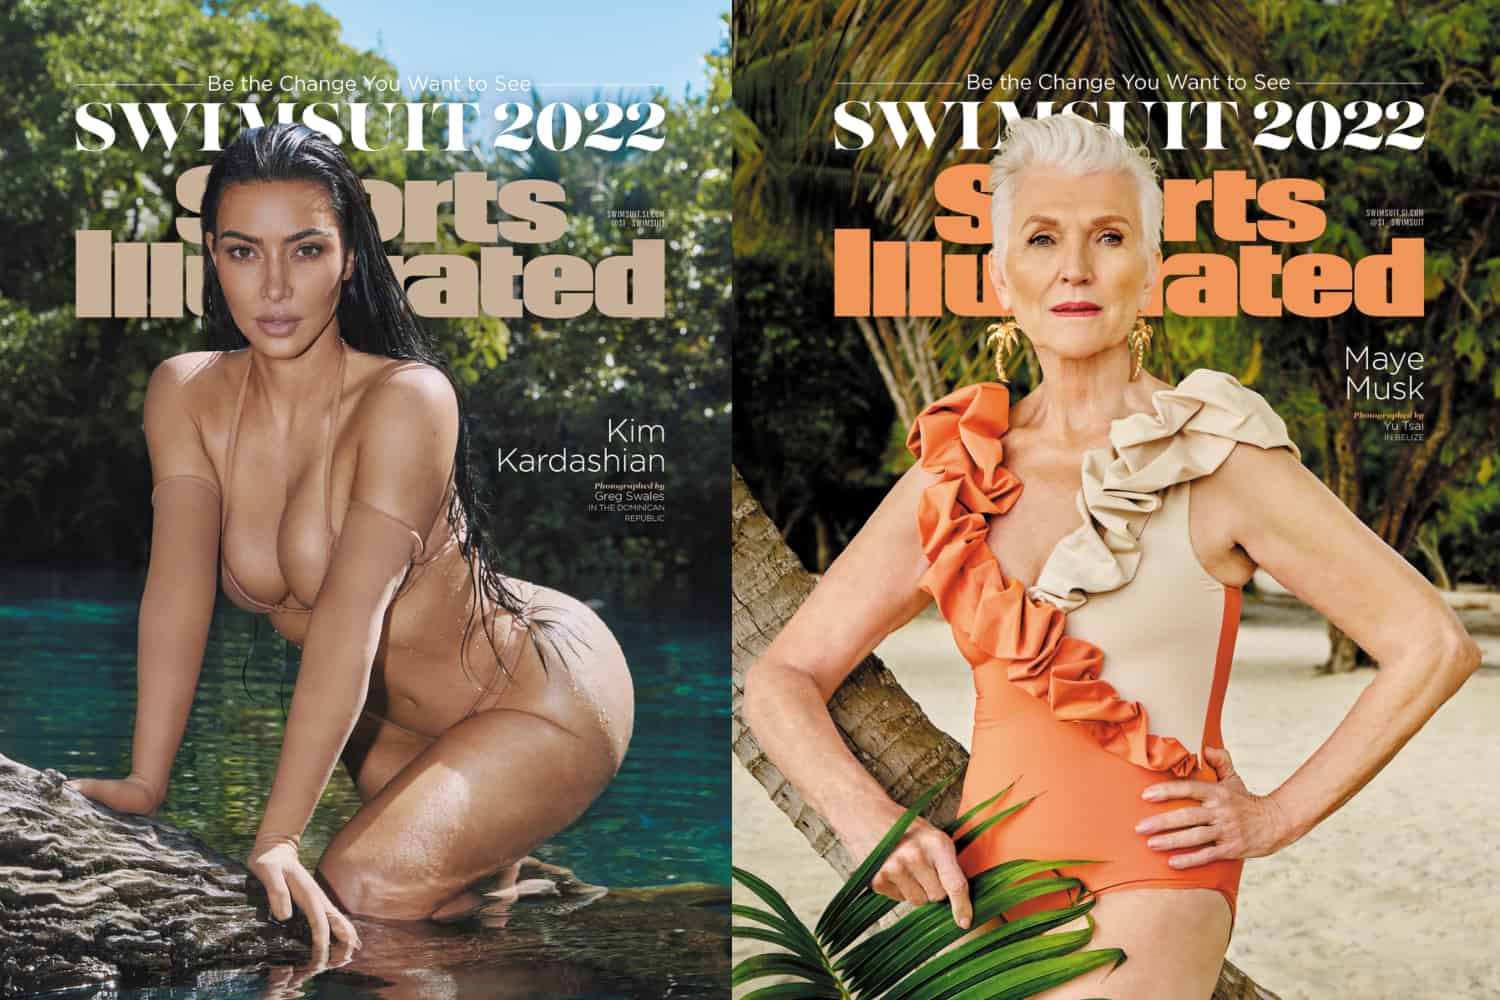 Your 2022 Sports Illustrated Swimsuit Cover Models Are Kim Kardashian,  Ciara, Maye Musk and Yumi Nu - Swimsuit